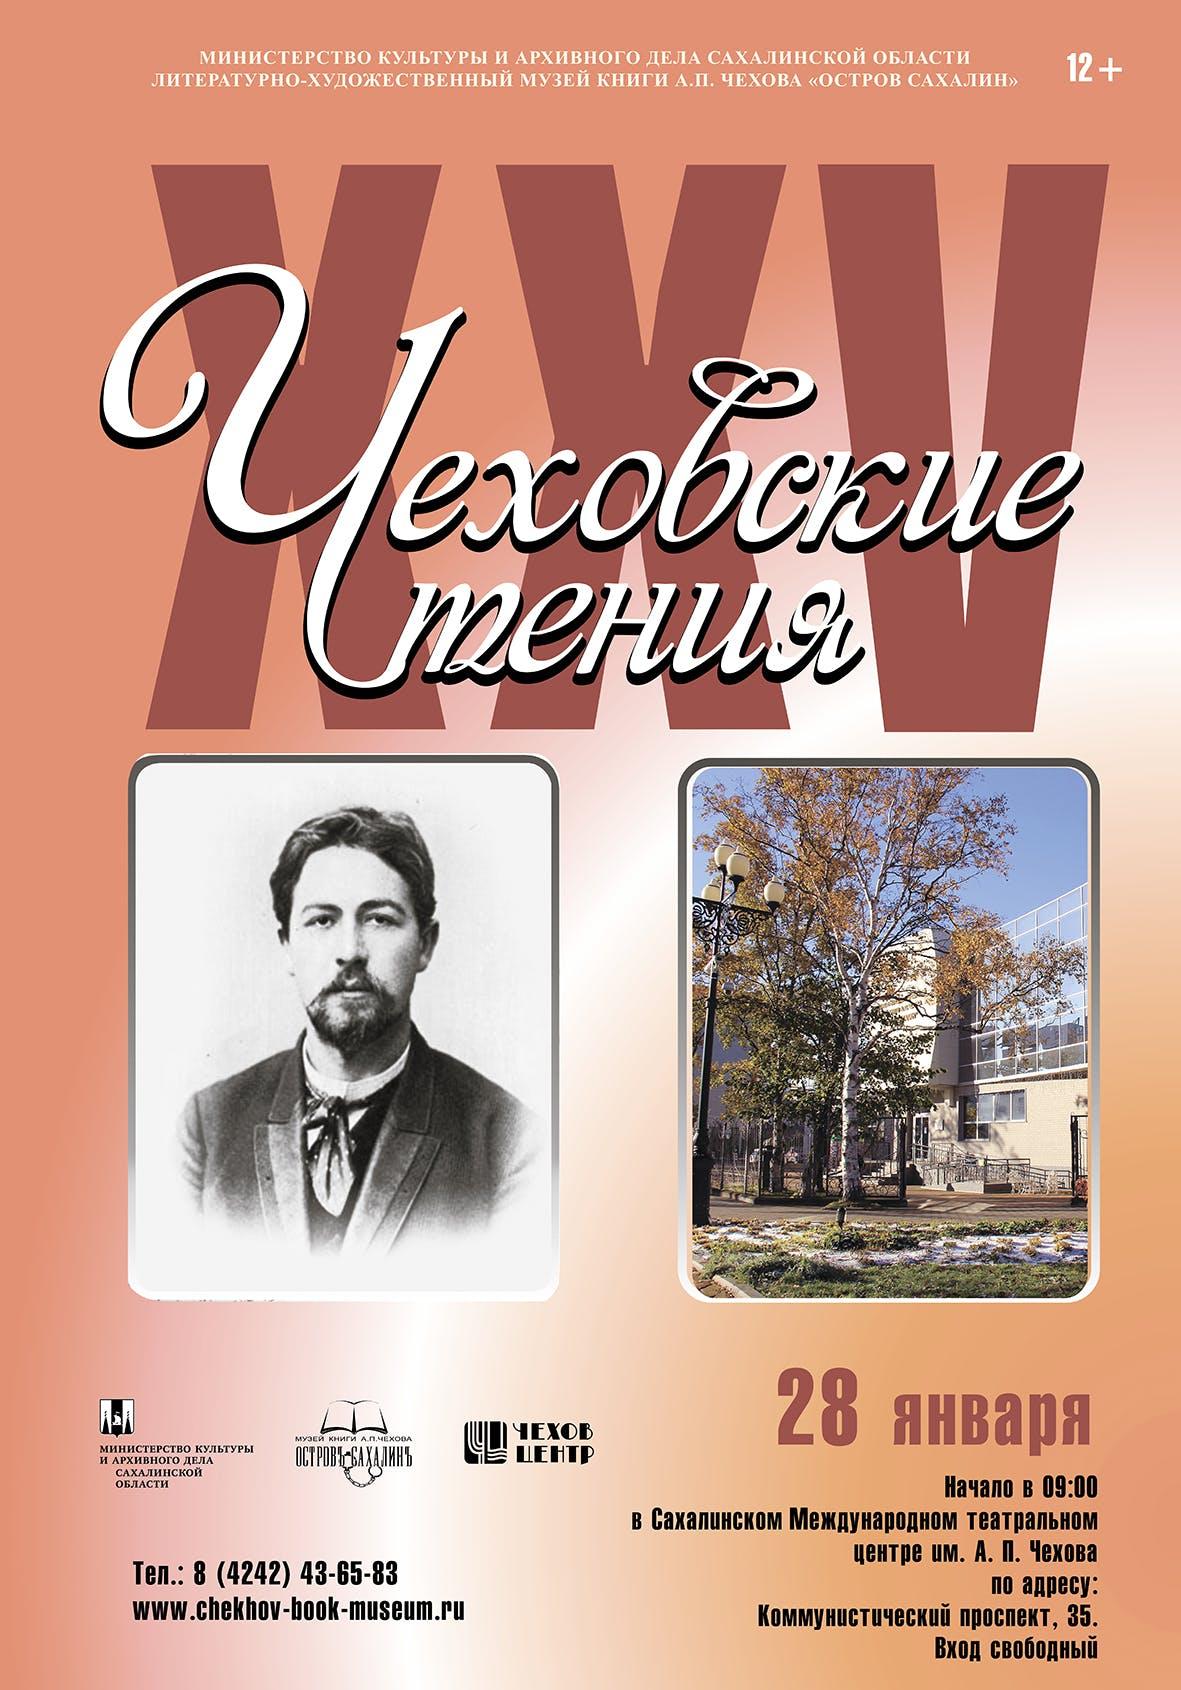 Poster of XXV Chekhov Readings, regional scientific conference, picture: Literary and Art museum of A.P. Chekhov's book "Sakhalin island"